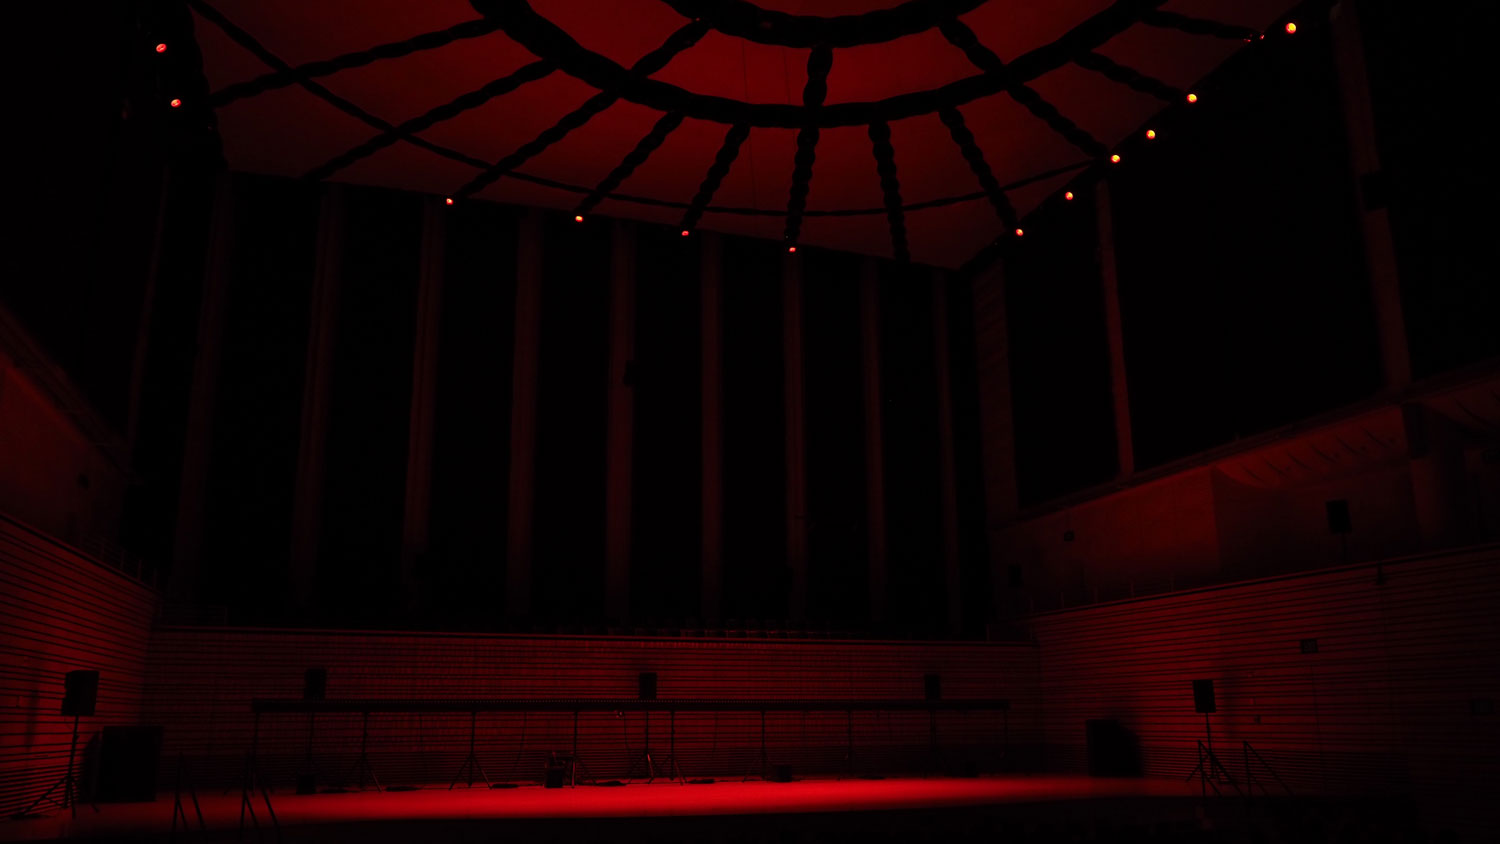 the concert hall bathed in deep red